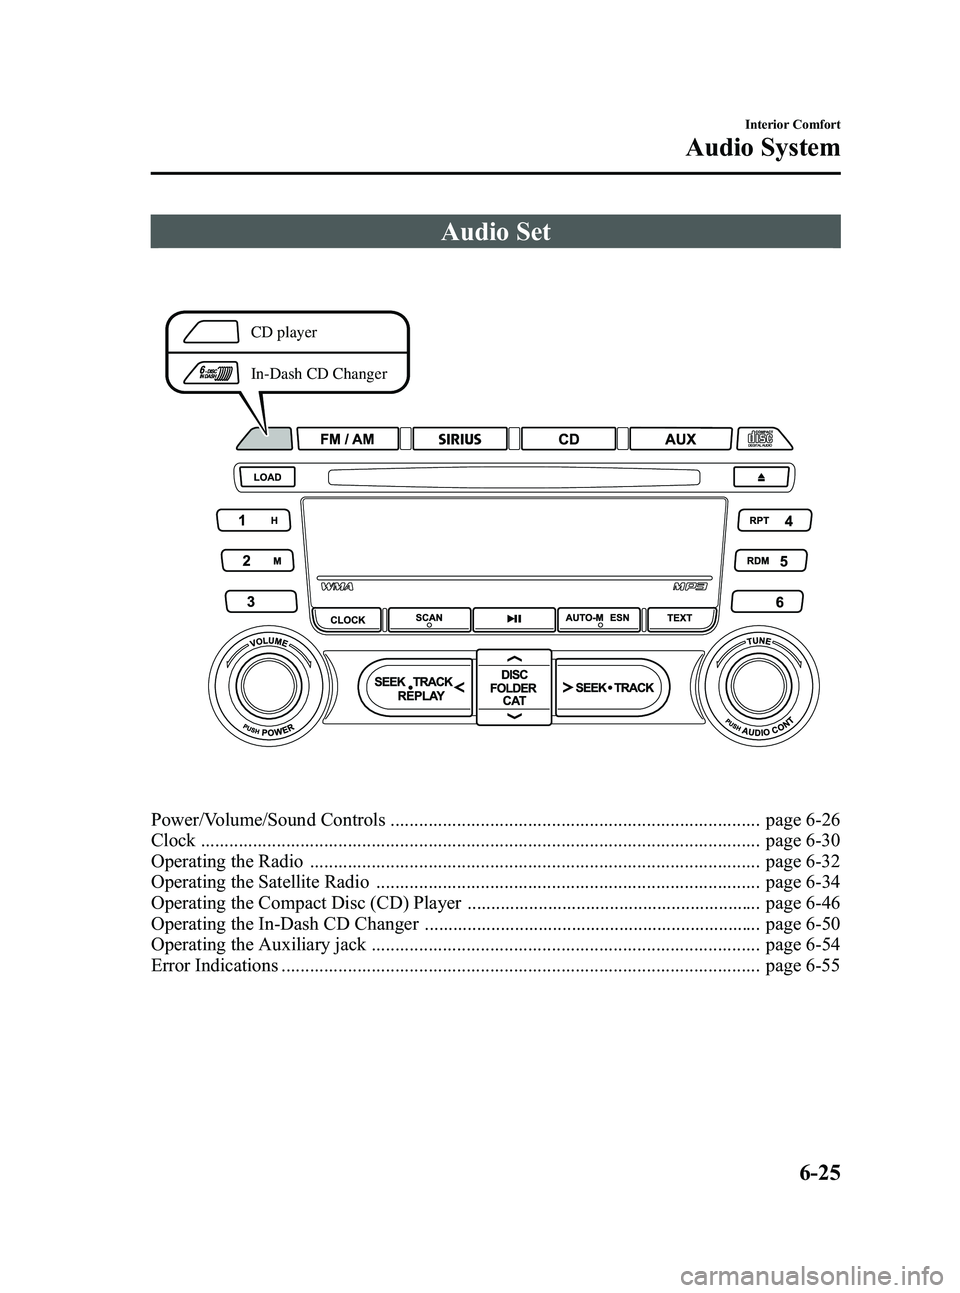 MAZDA MODEL MX-5 MIATA 2009  Owners Manual Black plate (241,1)
Audio Set
CD player
In-Dash CD Changer
Power/Volume/Sound Controls .............................................................................. page 6-26
Clock ..................